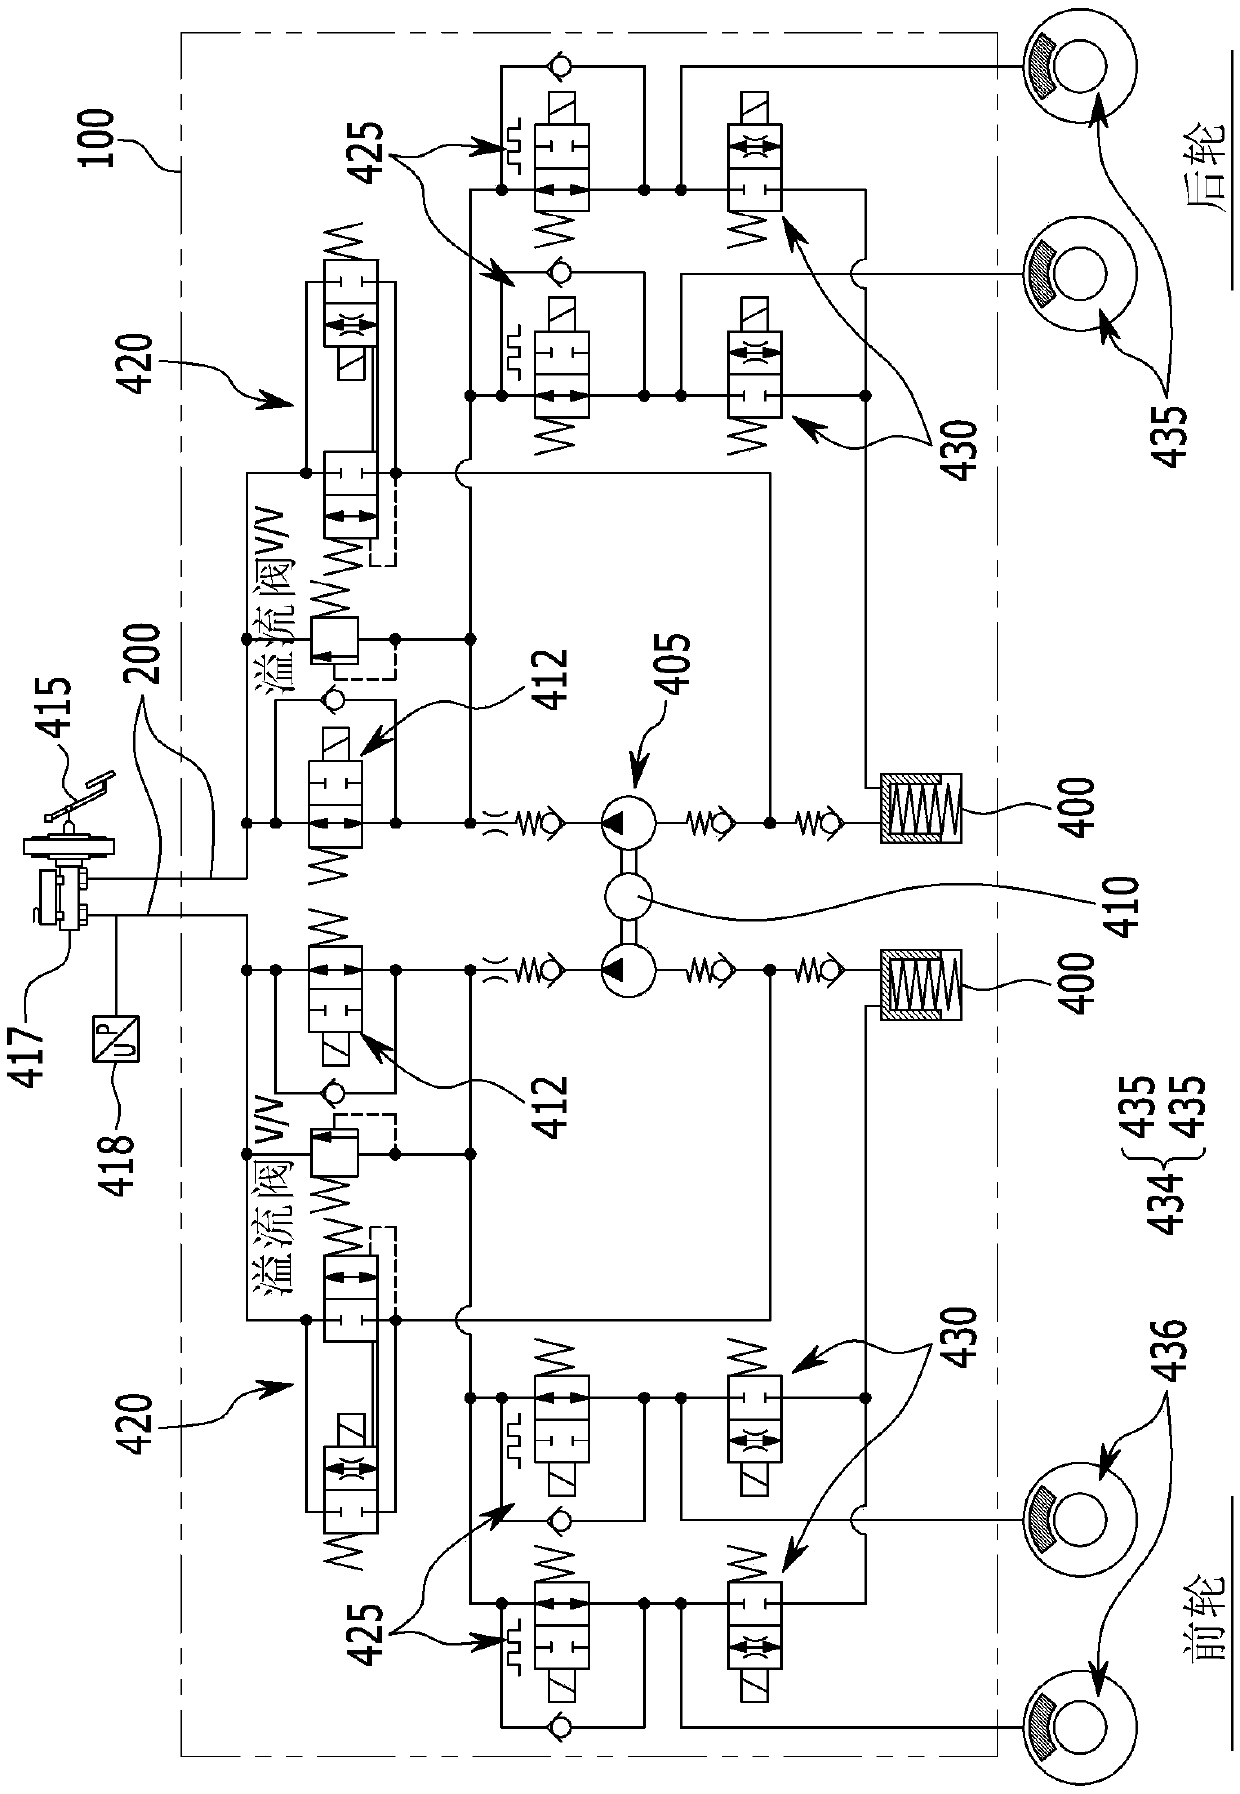 Control method of idle stop and go system